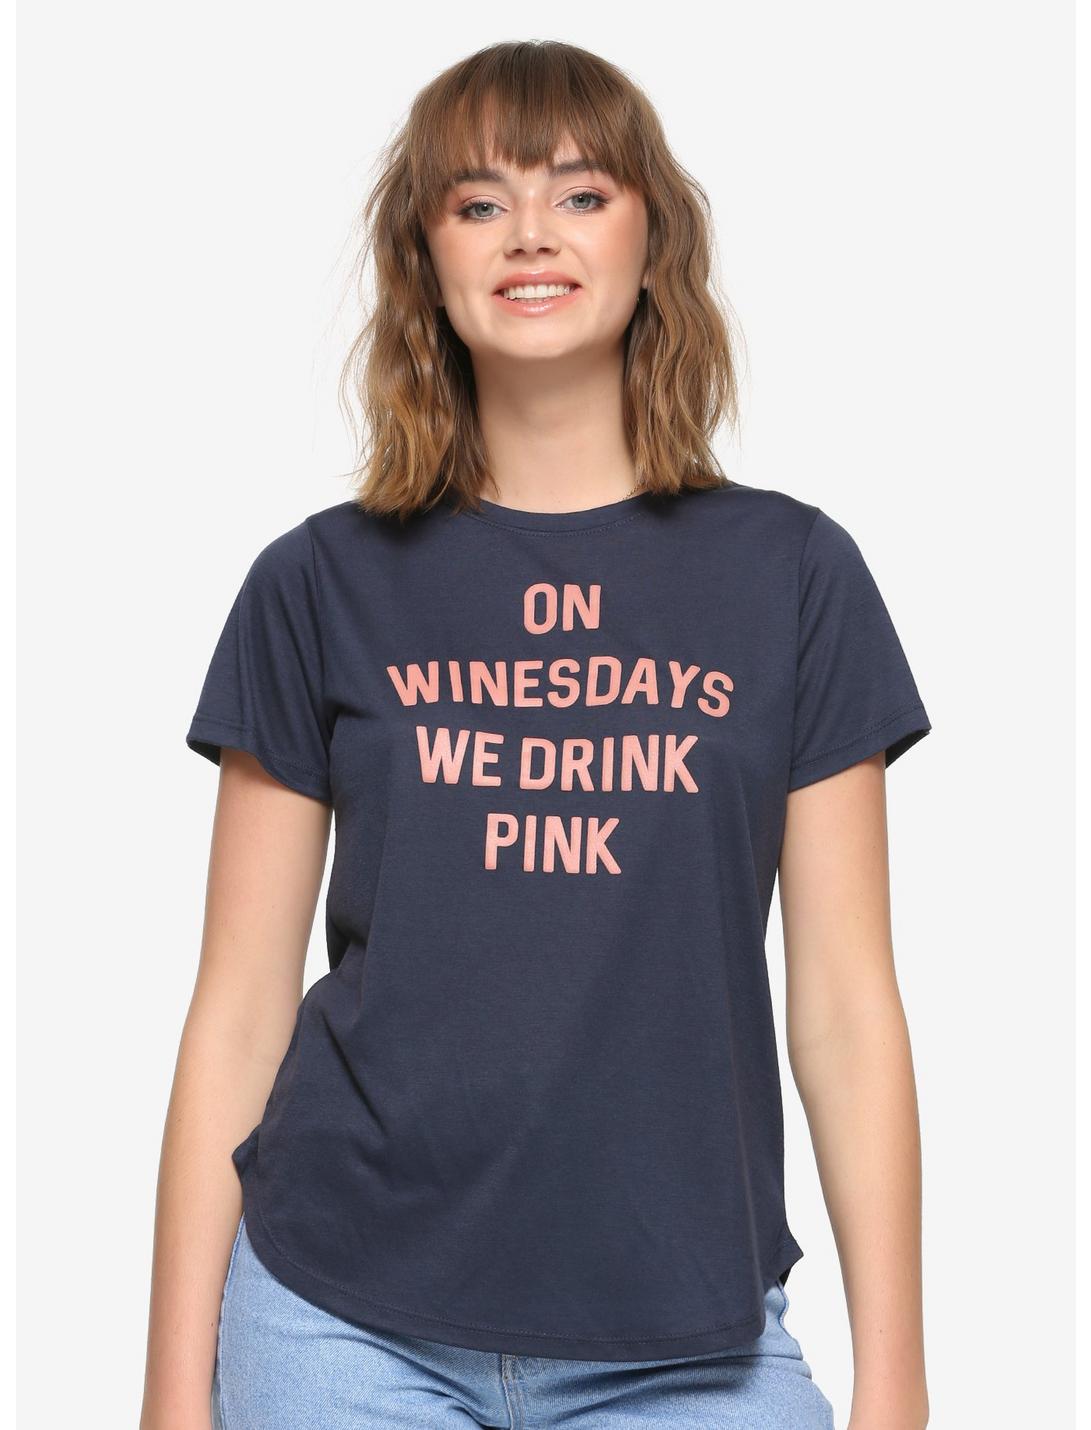 On Winesdays We Drink Pink Women's T-Shirt, NAVY, hi-res